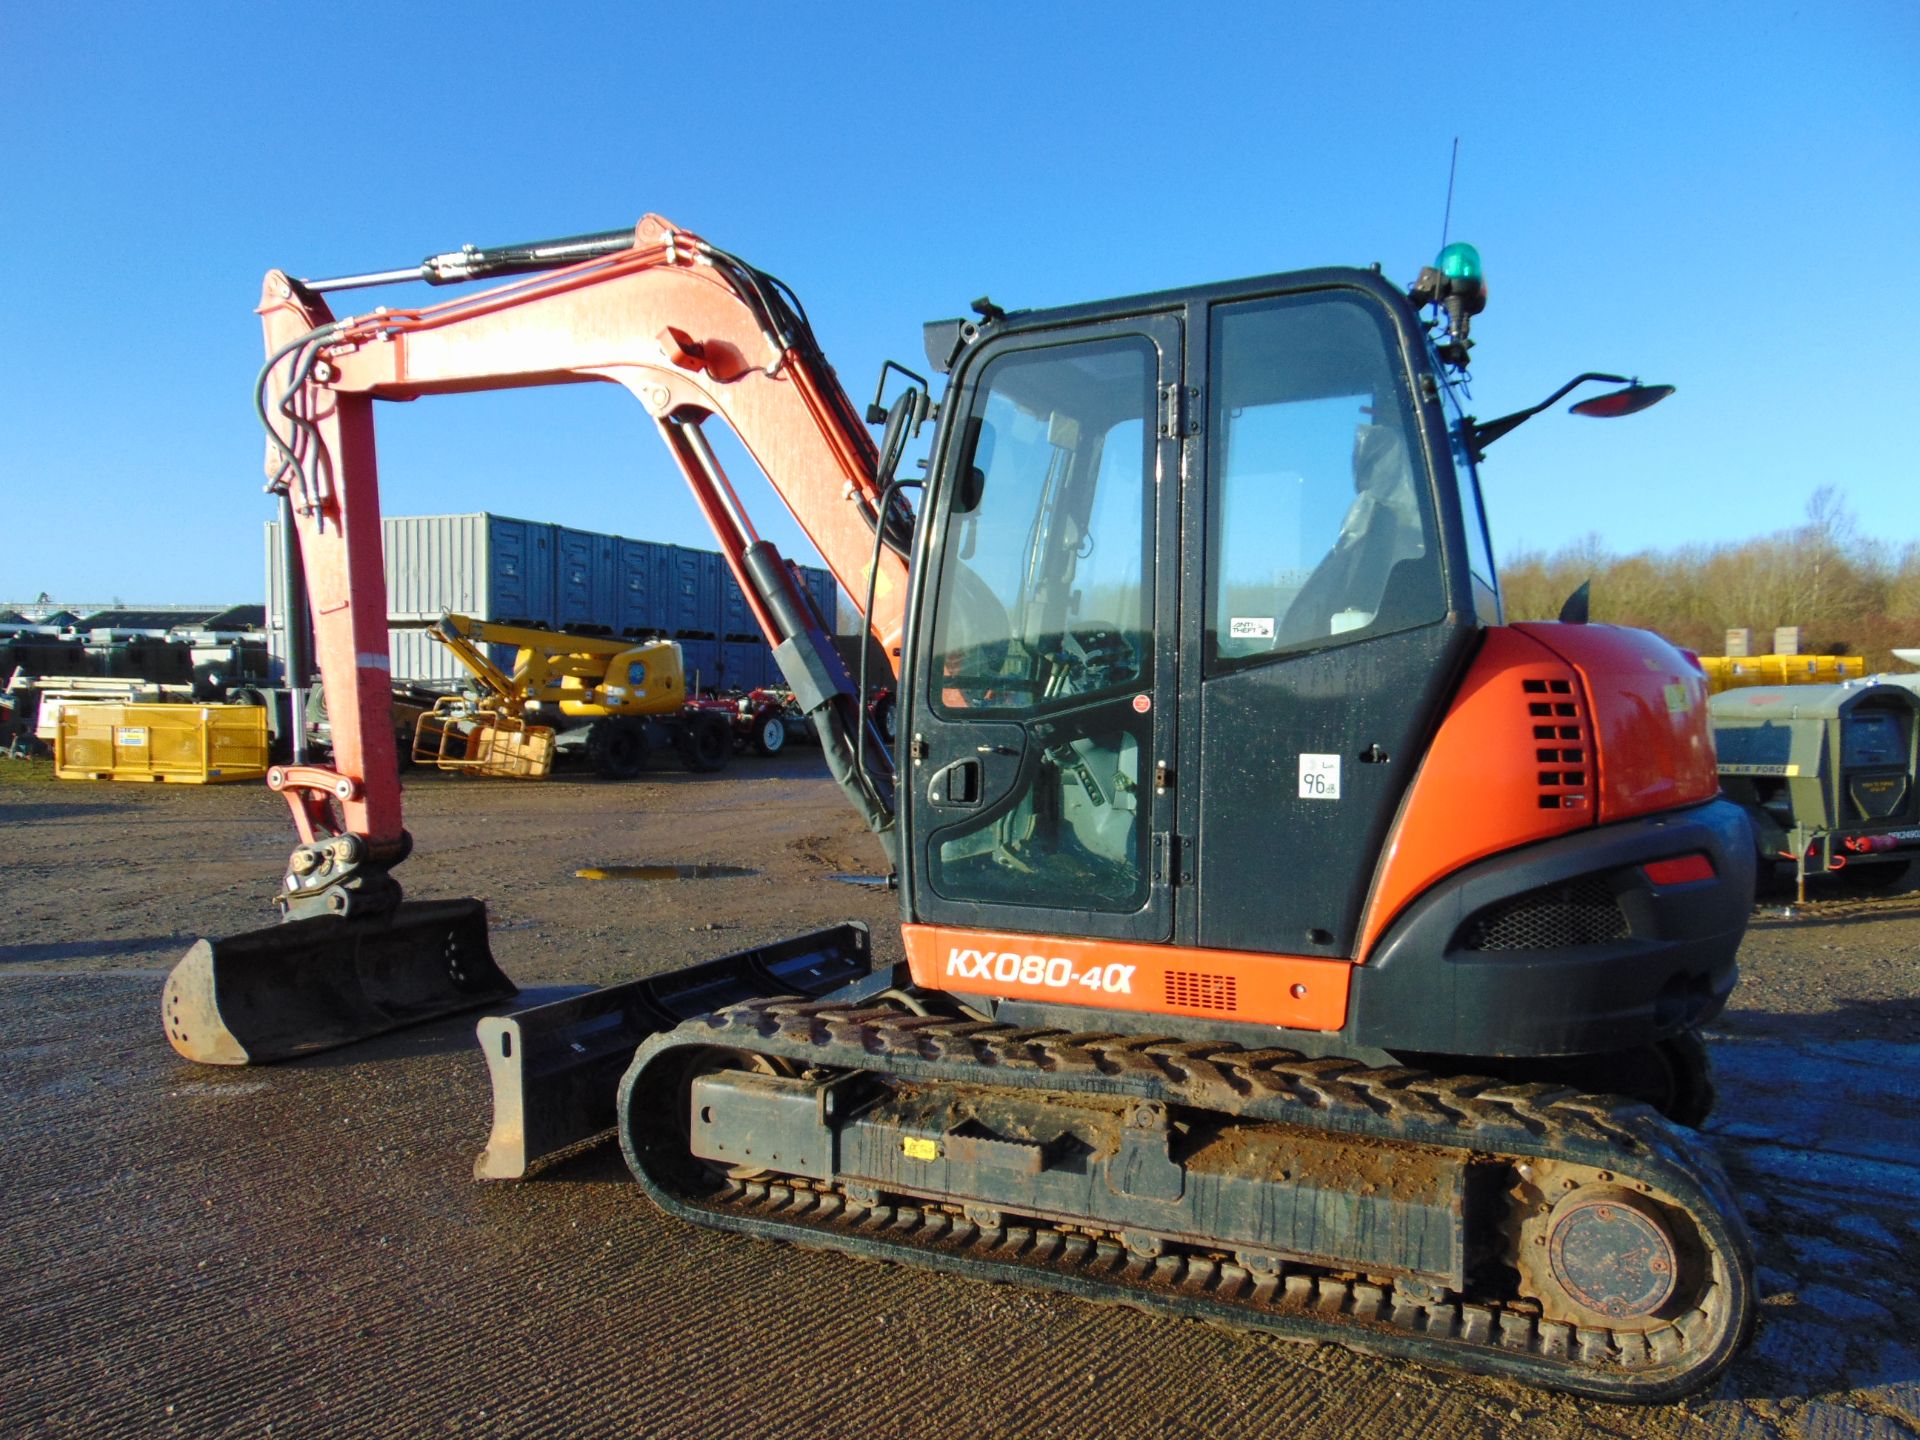 2017 KUBOTA KX 080-4A Excavator 1212 Hrs Only Very High Specification with 3 Buckets Sno 42470